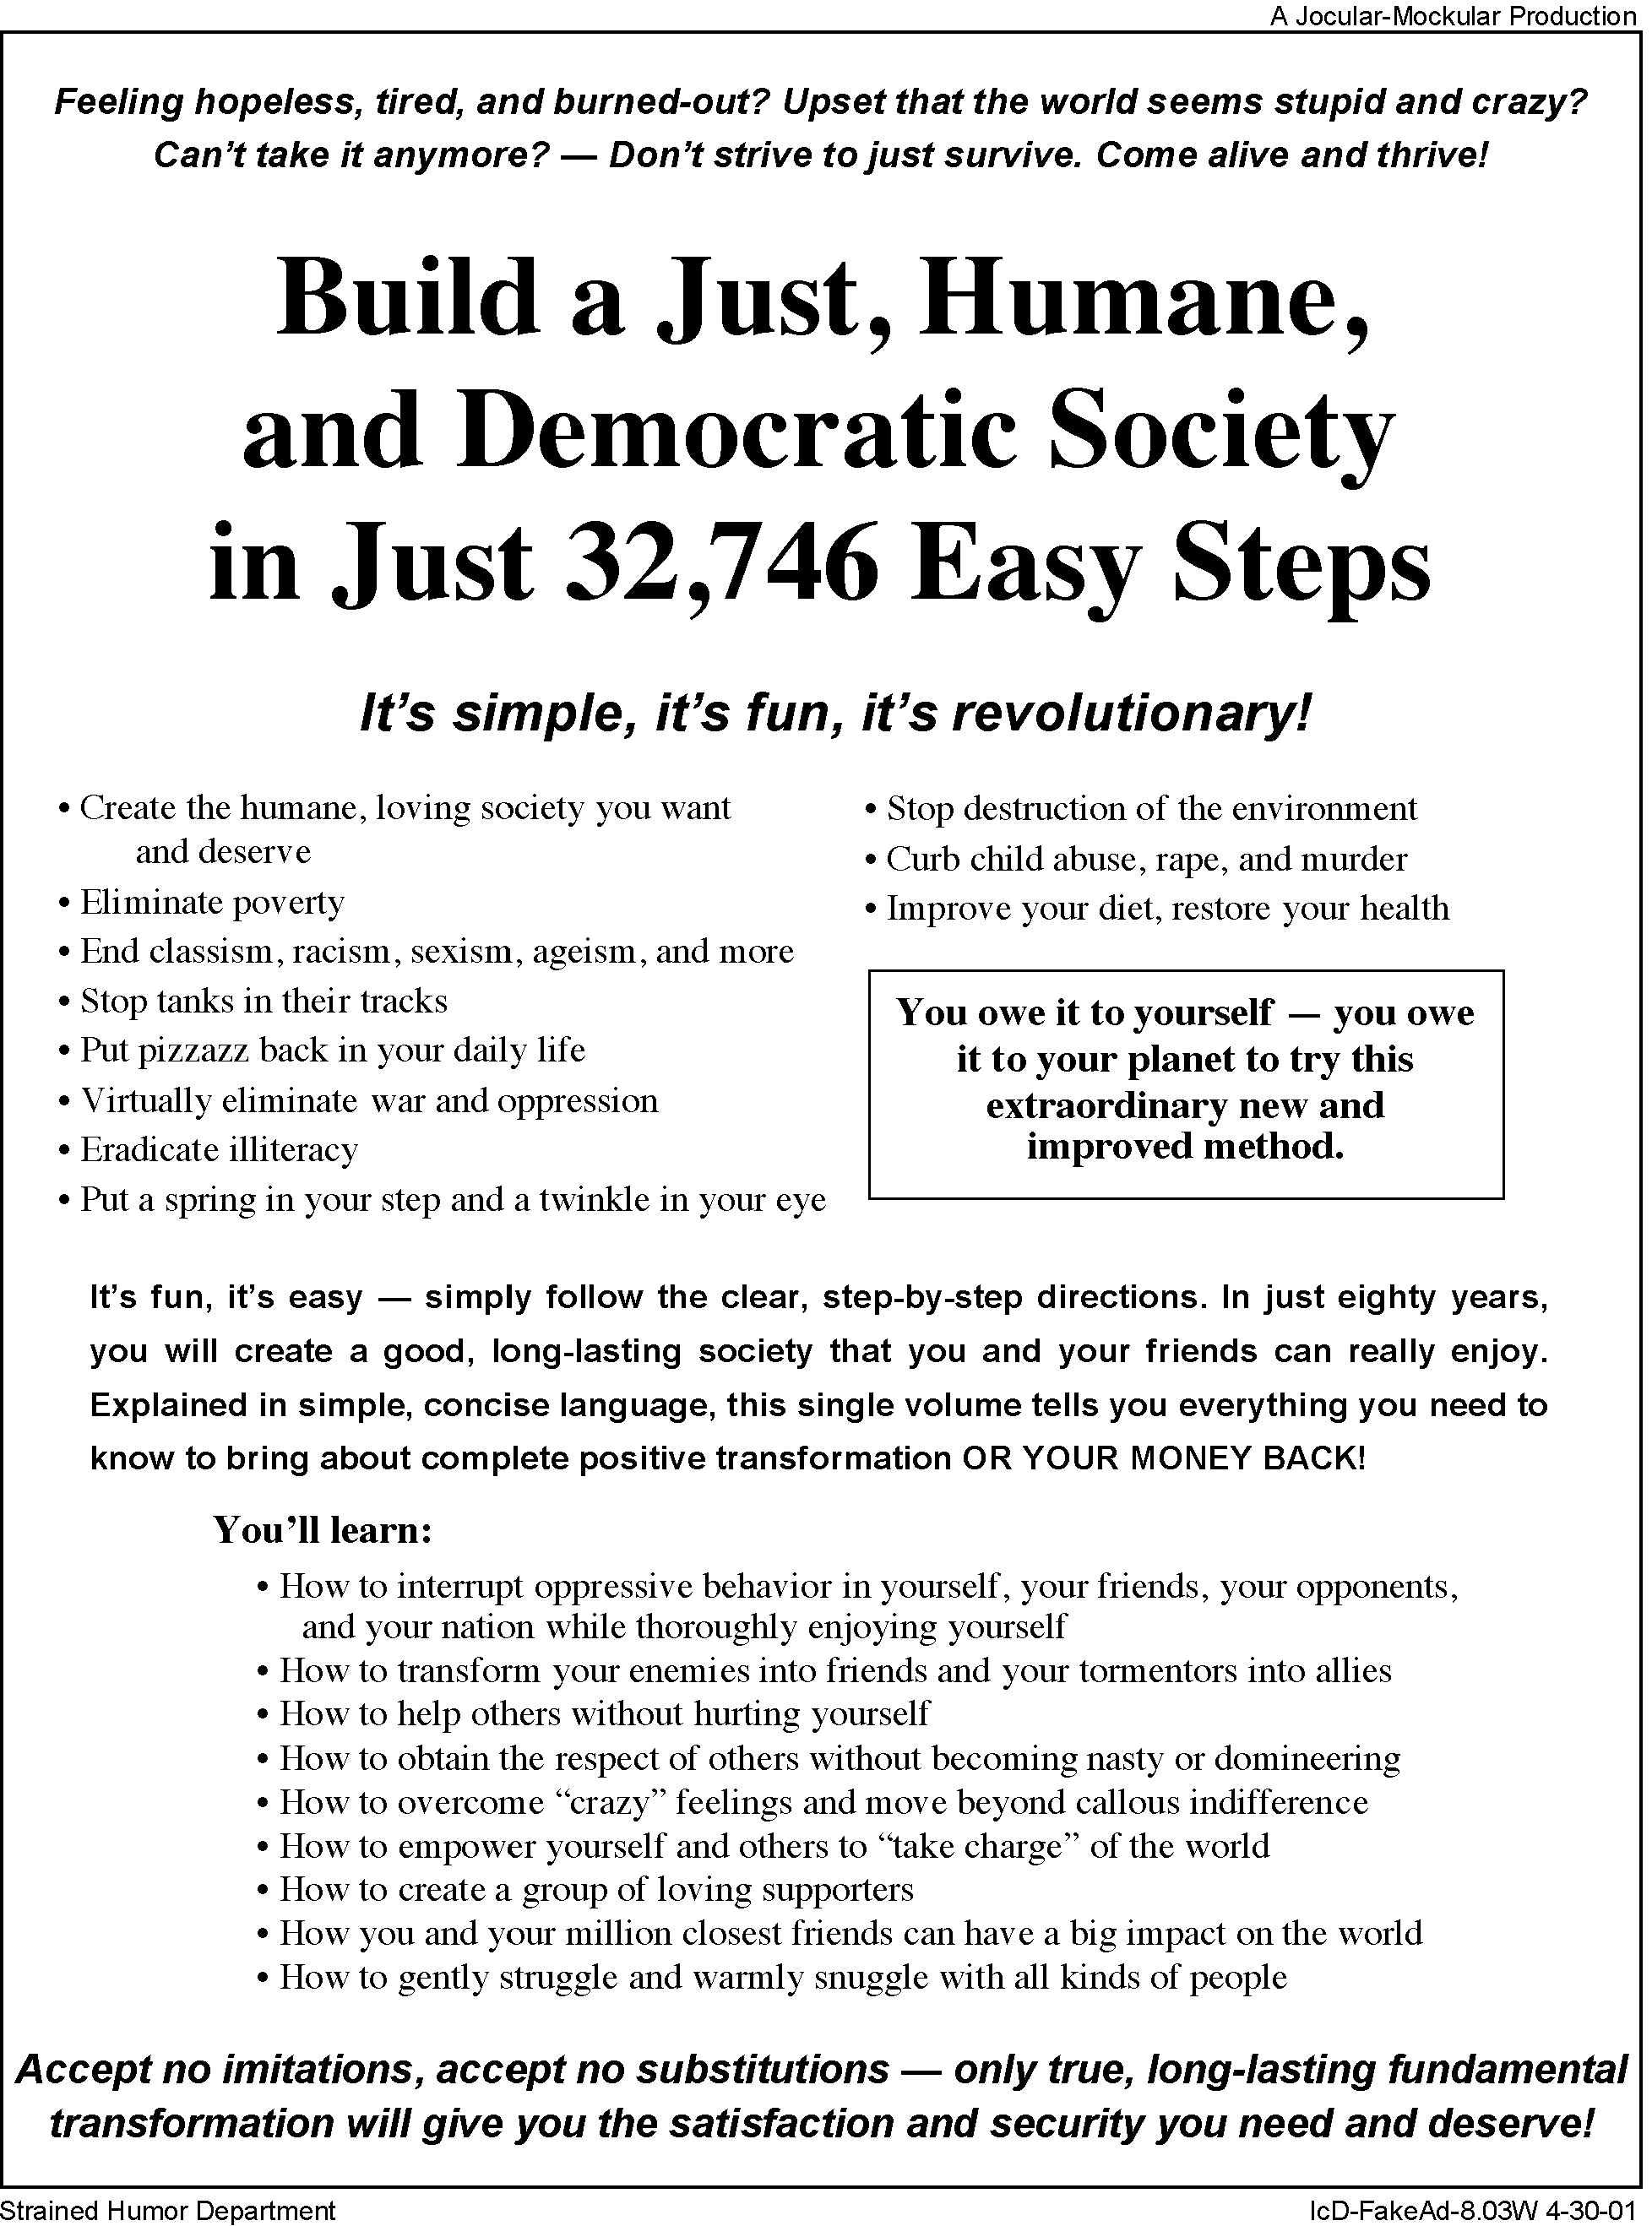 Fake Ad - How You Can Create a Good Society in Just 32,746 Steps